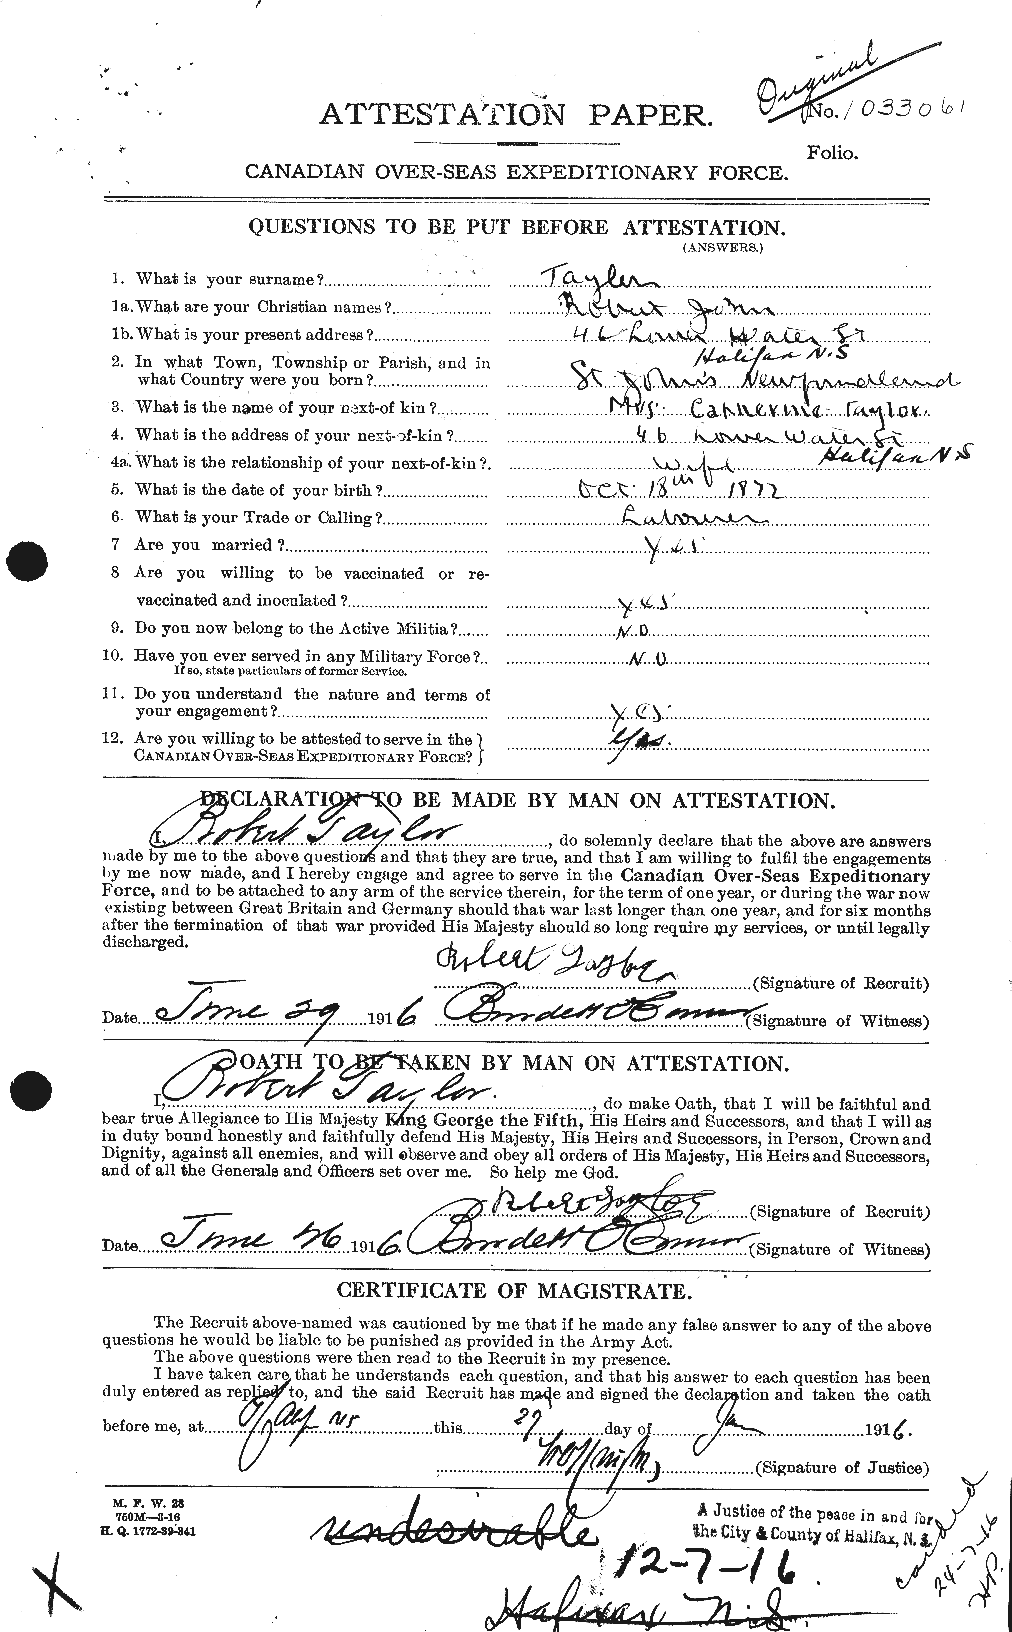 Personnel Records of the First World War - CEF 627489a